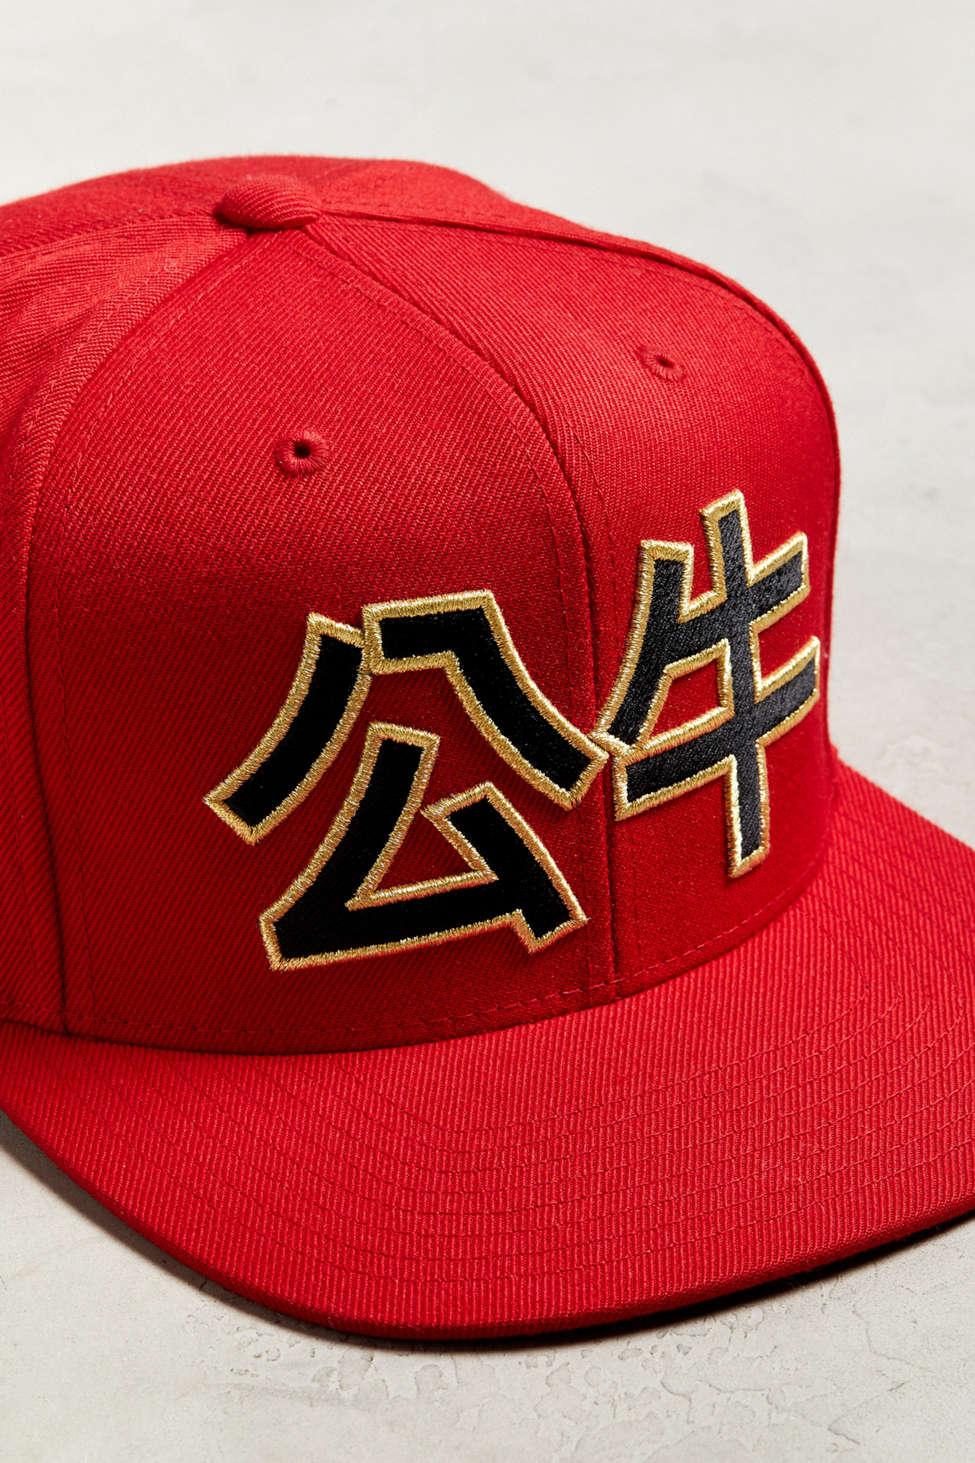 Lyst - Mitchell & Ness Chinese New Year Chicago Bulls Snapback Hat in ...